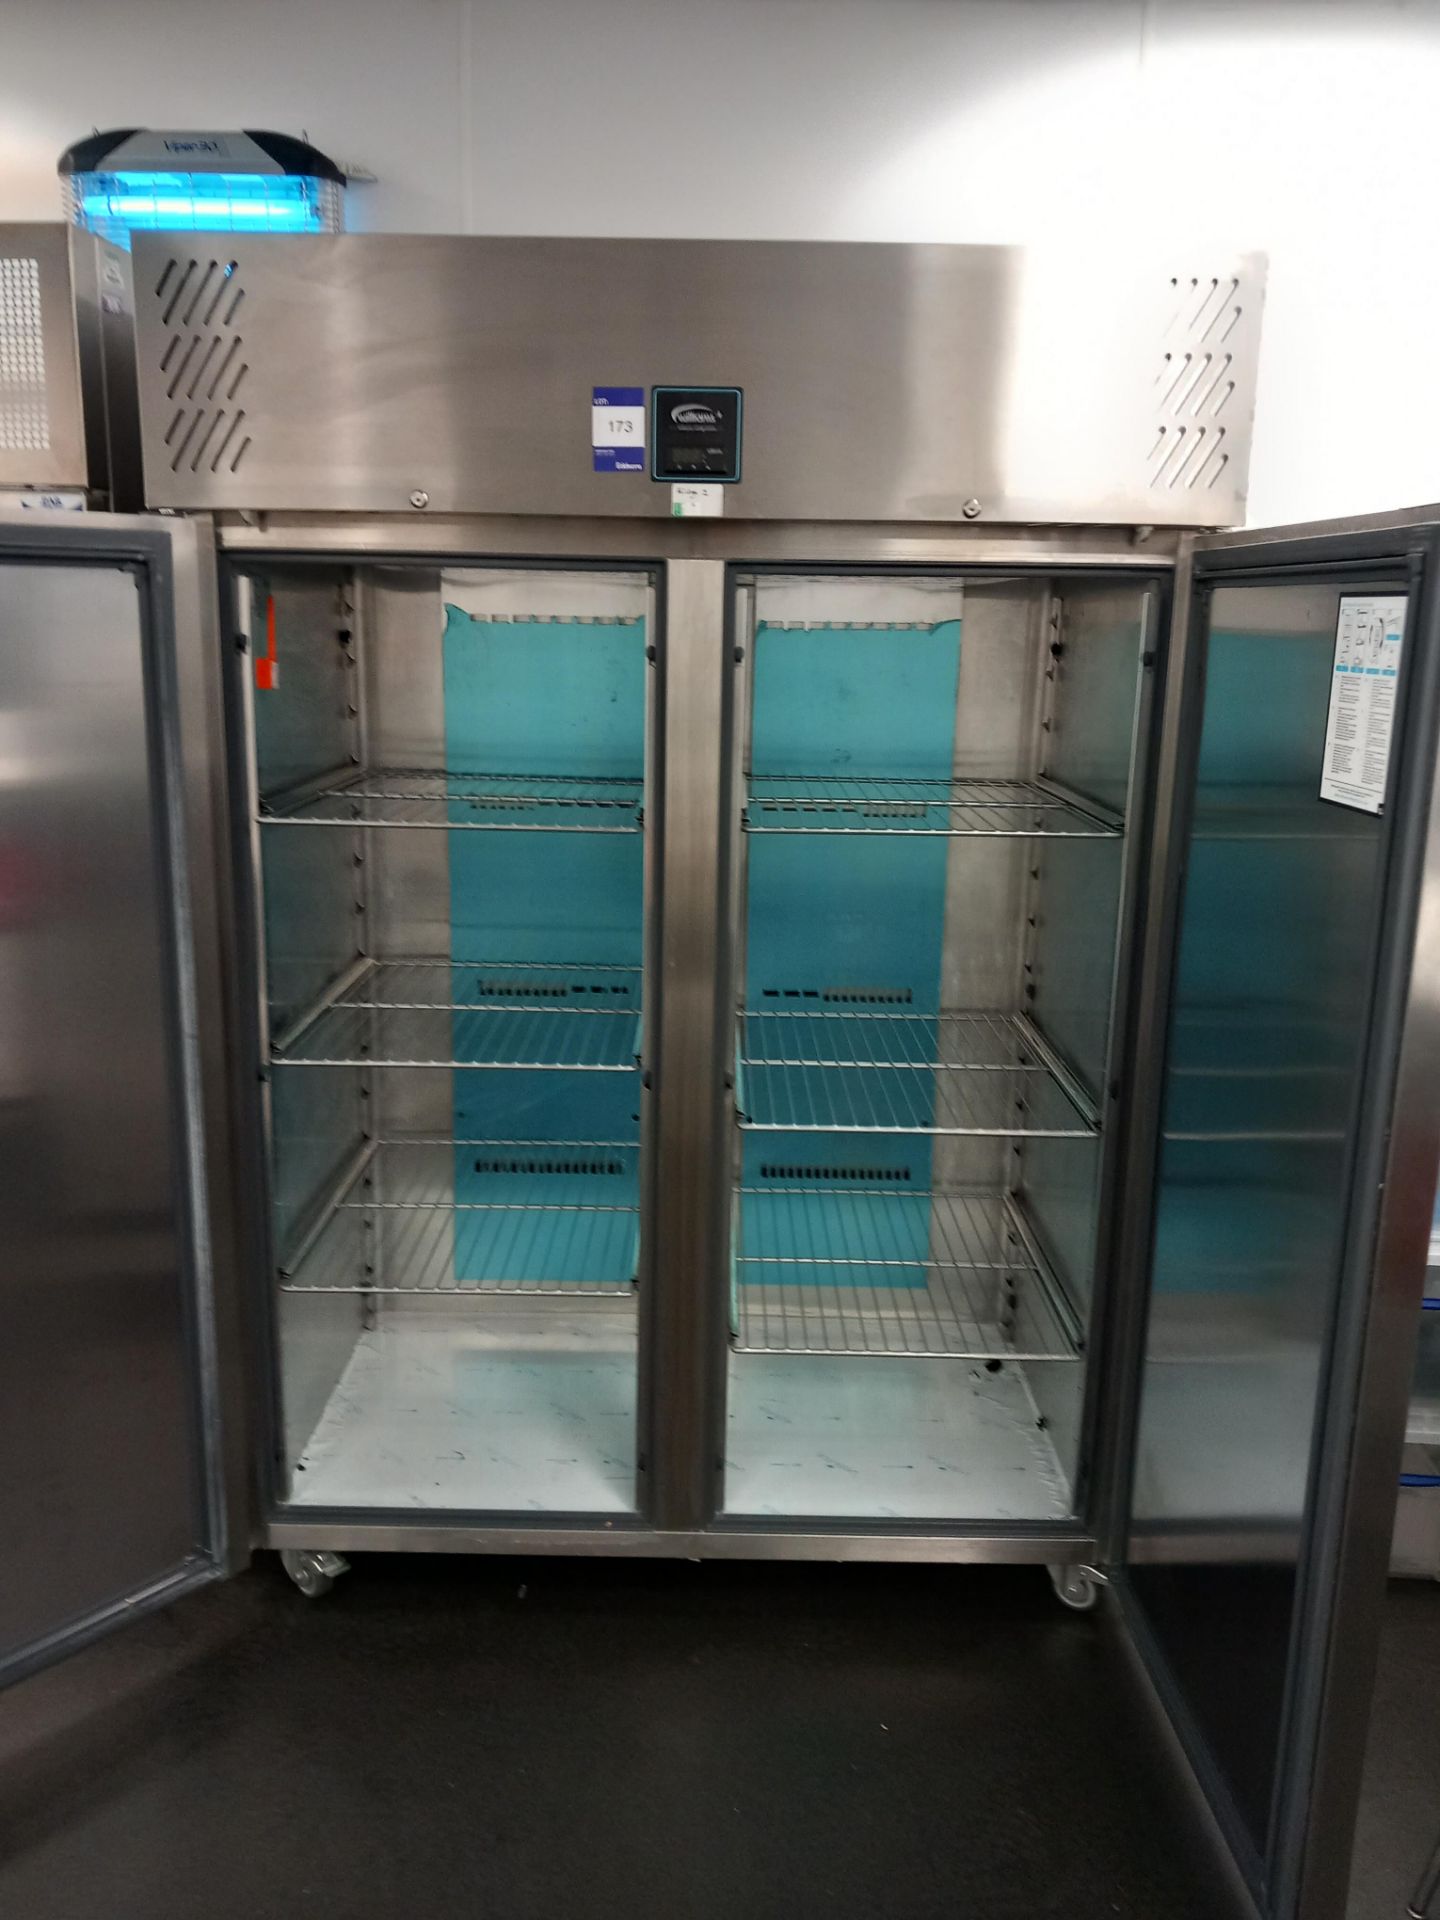 Williams HJ25A R2 Double Door Fridge Serial number 1612/813503 230v (1900x1400x800) - Image 2 of 3